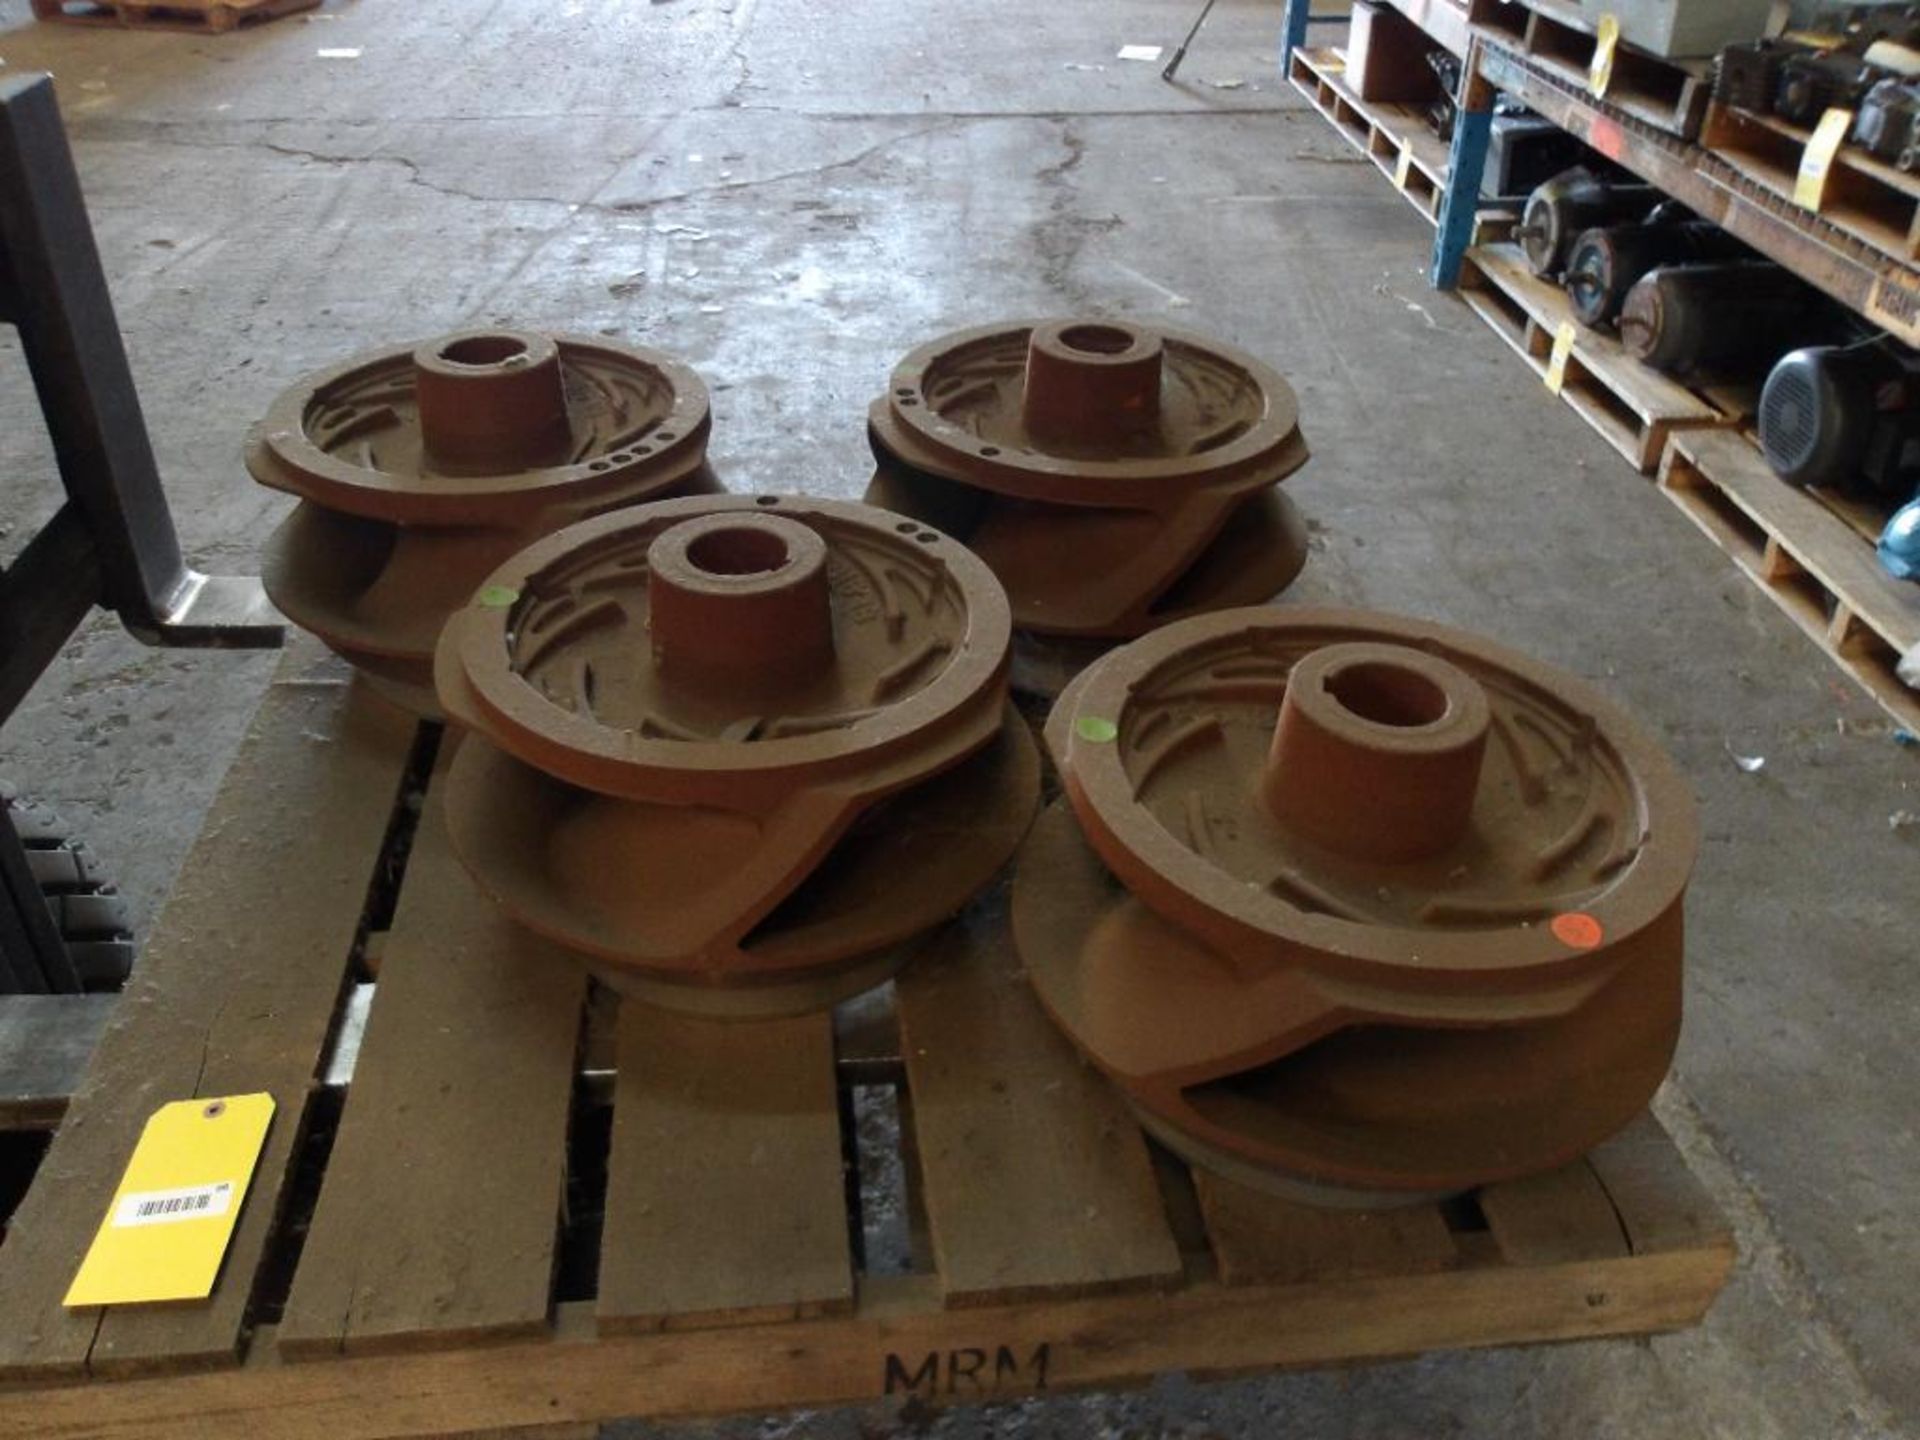 (4) Submersible Pump Impellers, Iron, Casting No. 615T3 (New)